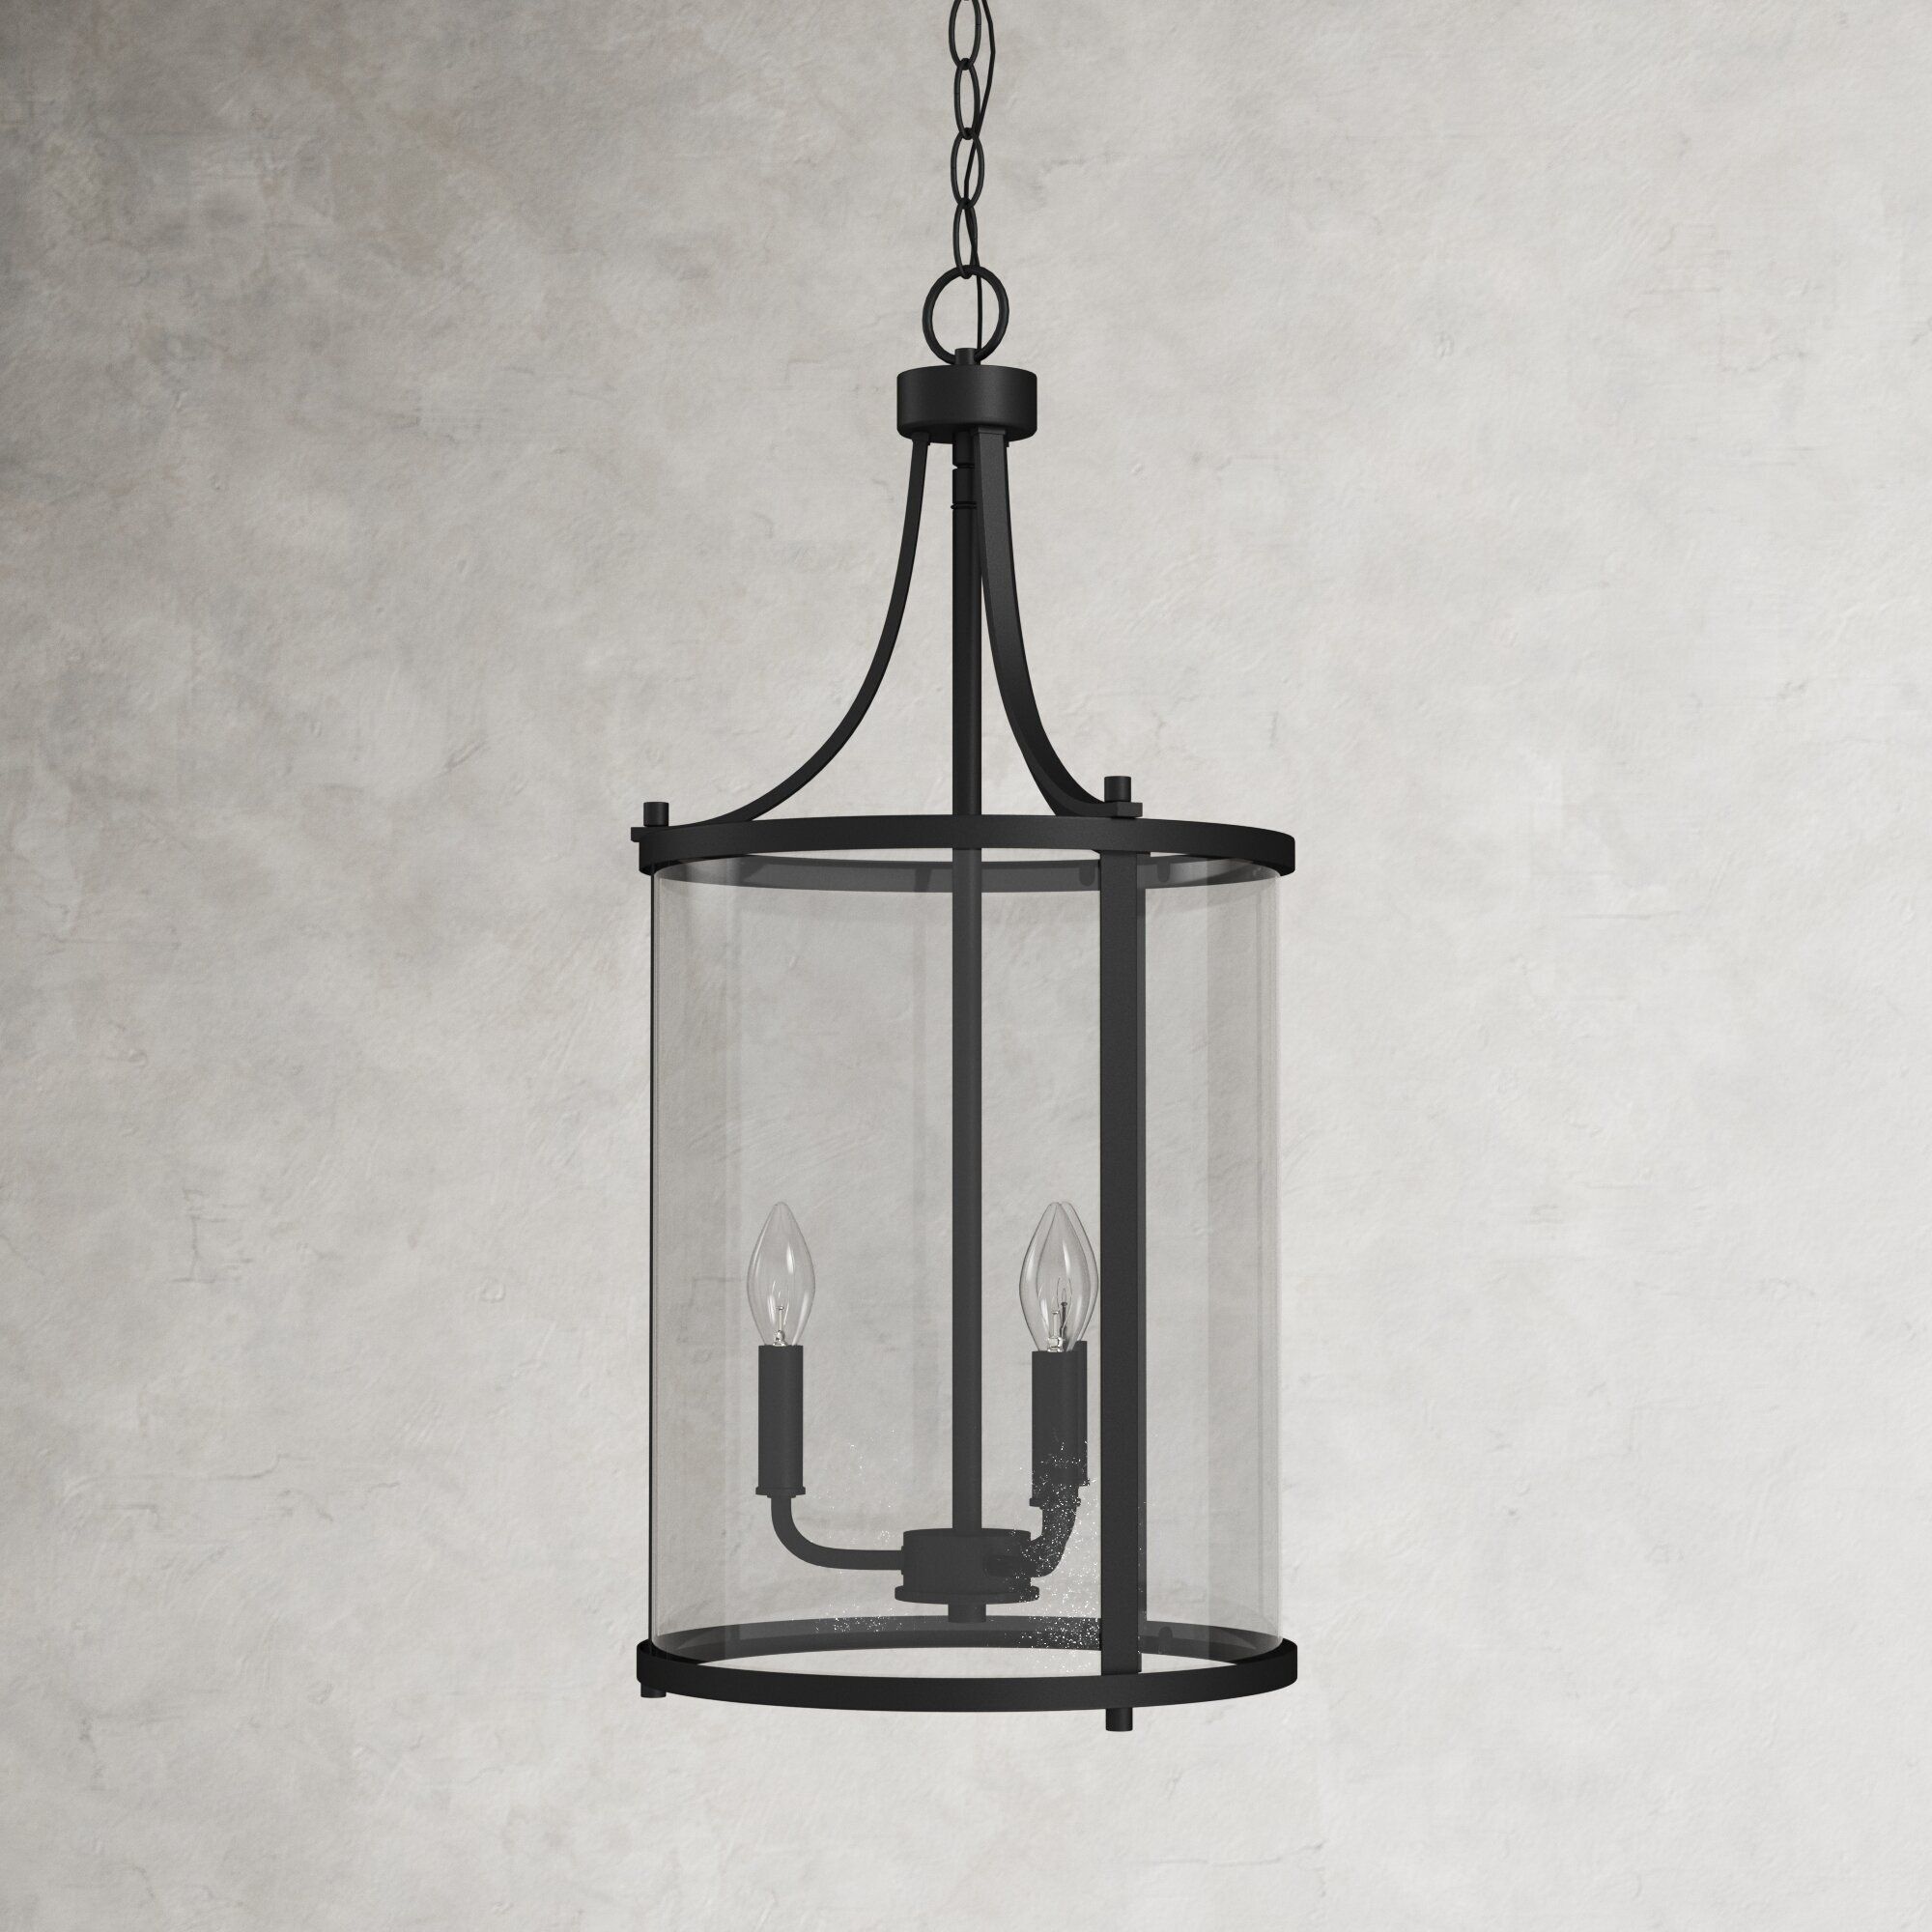 Wayfair | Black Finish Lantern Chandeliers You'll Love In 2022 Intended For Black Iron Lantern Chandeliers (Photo 9 of 15)